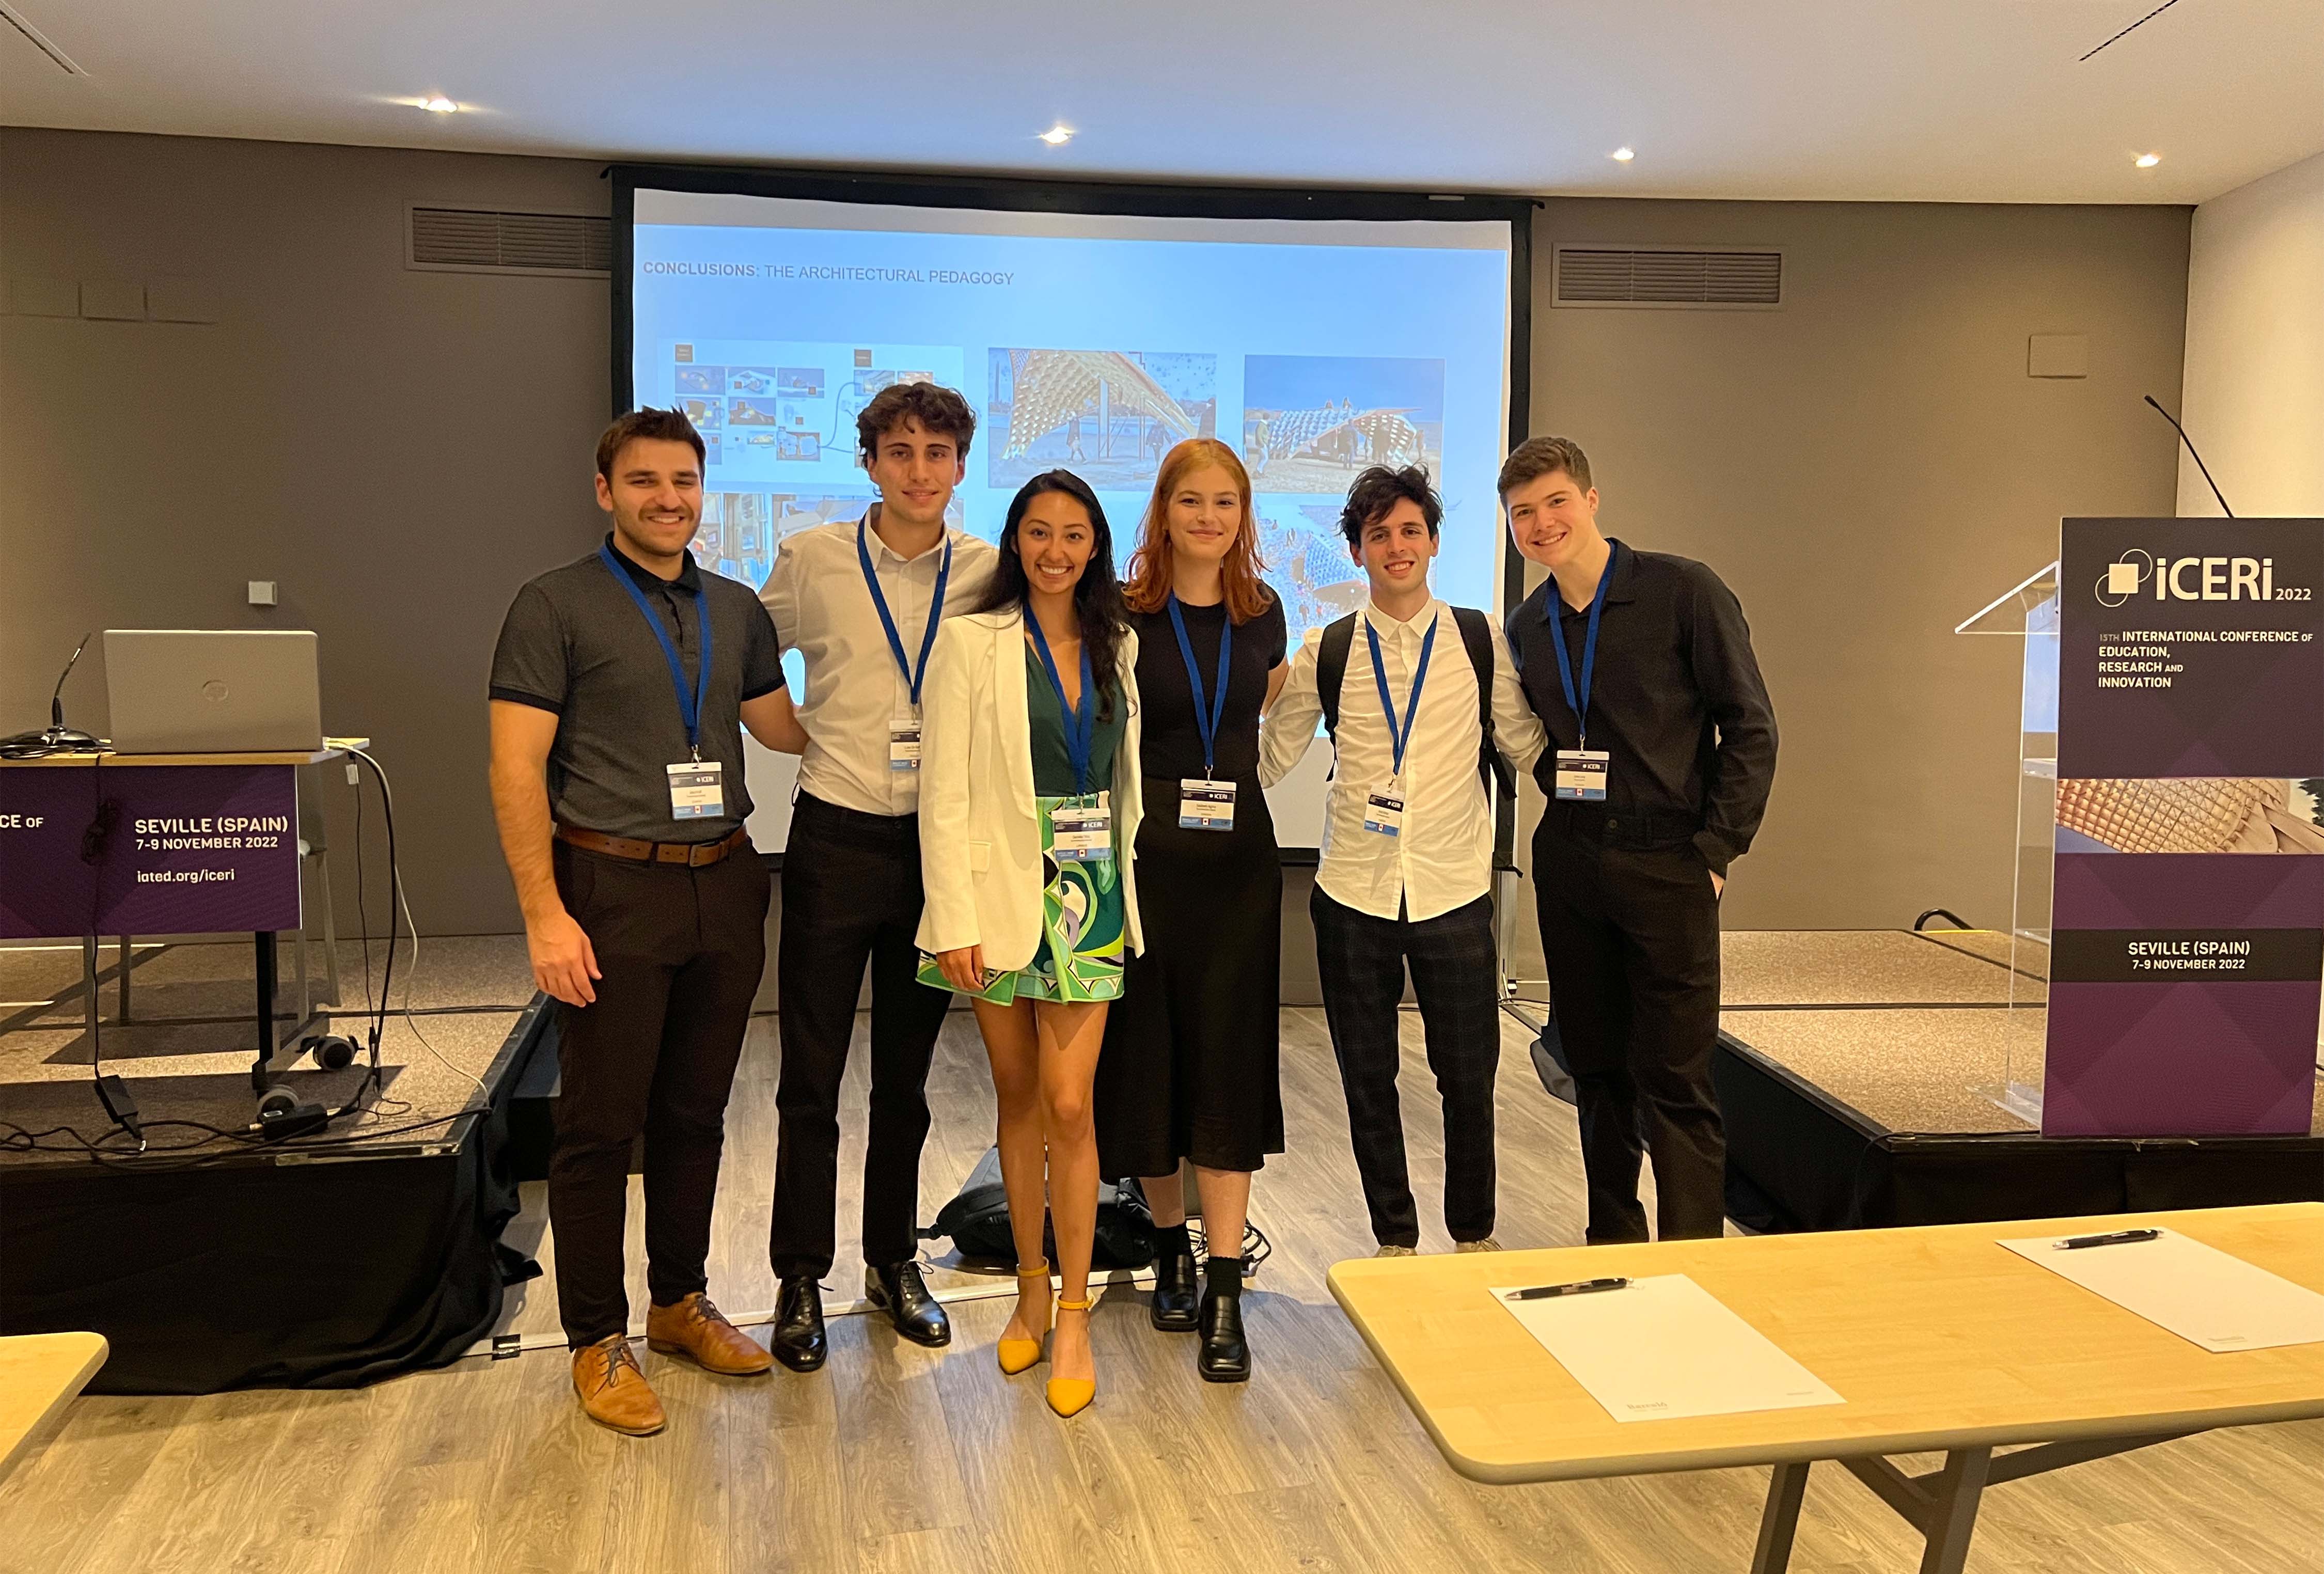 Undergraduate students Ariel Weiss, Jakey Levy, Jake Kroft, Luke De Bartolo, Sadberk Agma, and Daniela Diaz presenting at the International Conference of Education, Research and Innovation.